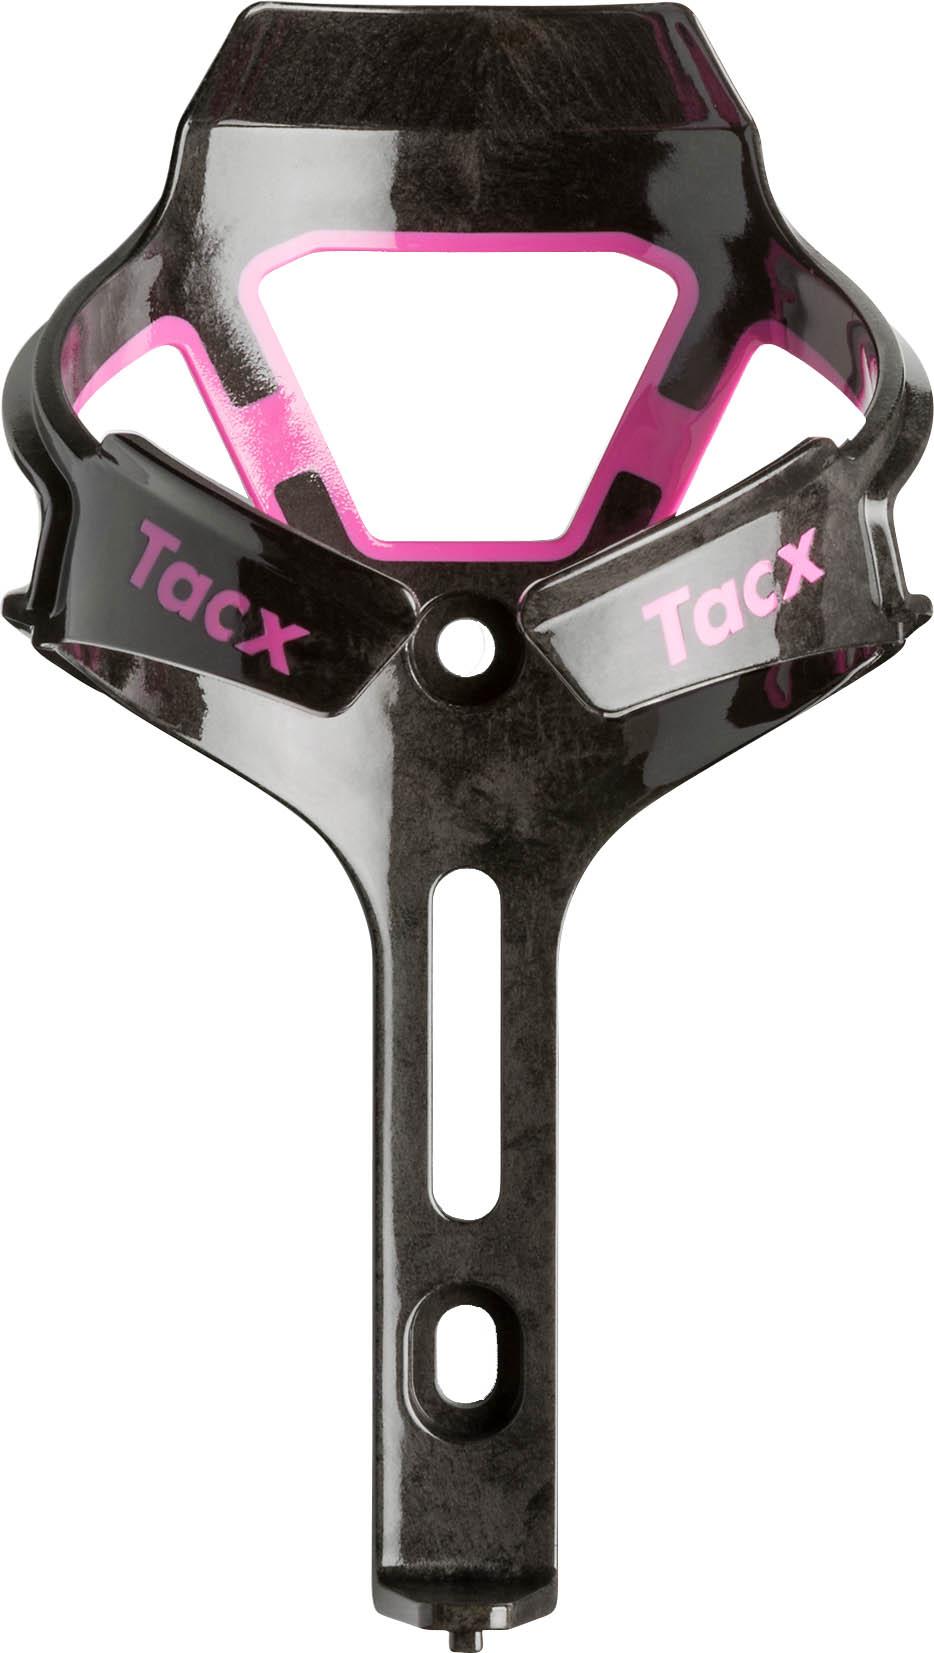 Tacx Ciro Bottle Cage - Pink